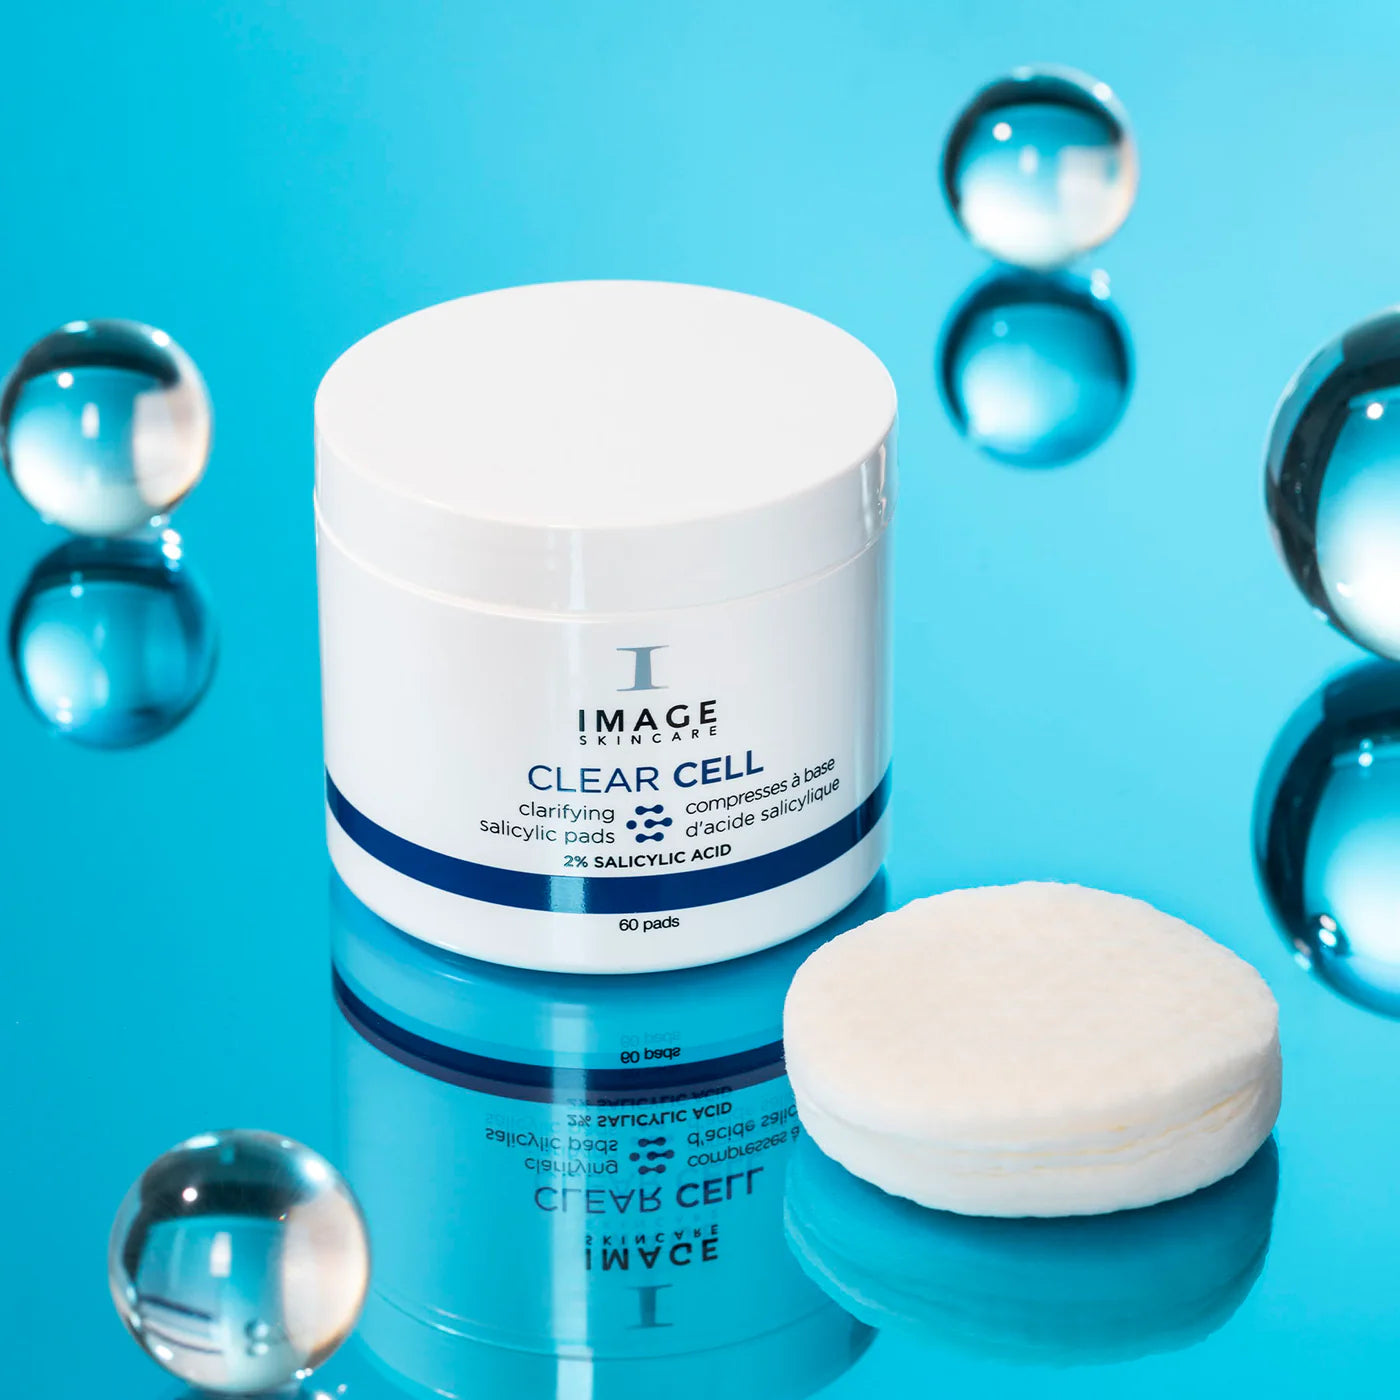 IMAGE SKINCARE CLEAR CELL salicylic clarifying pads